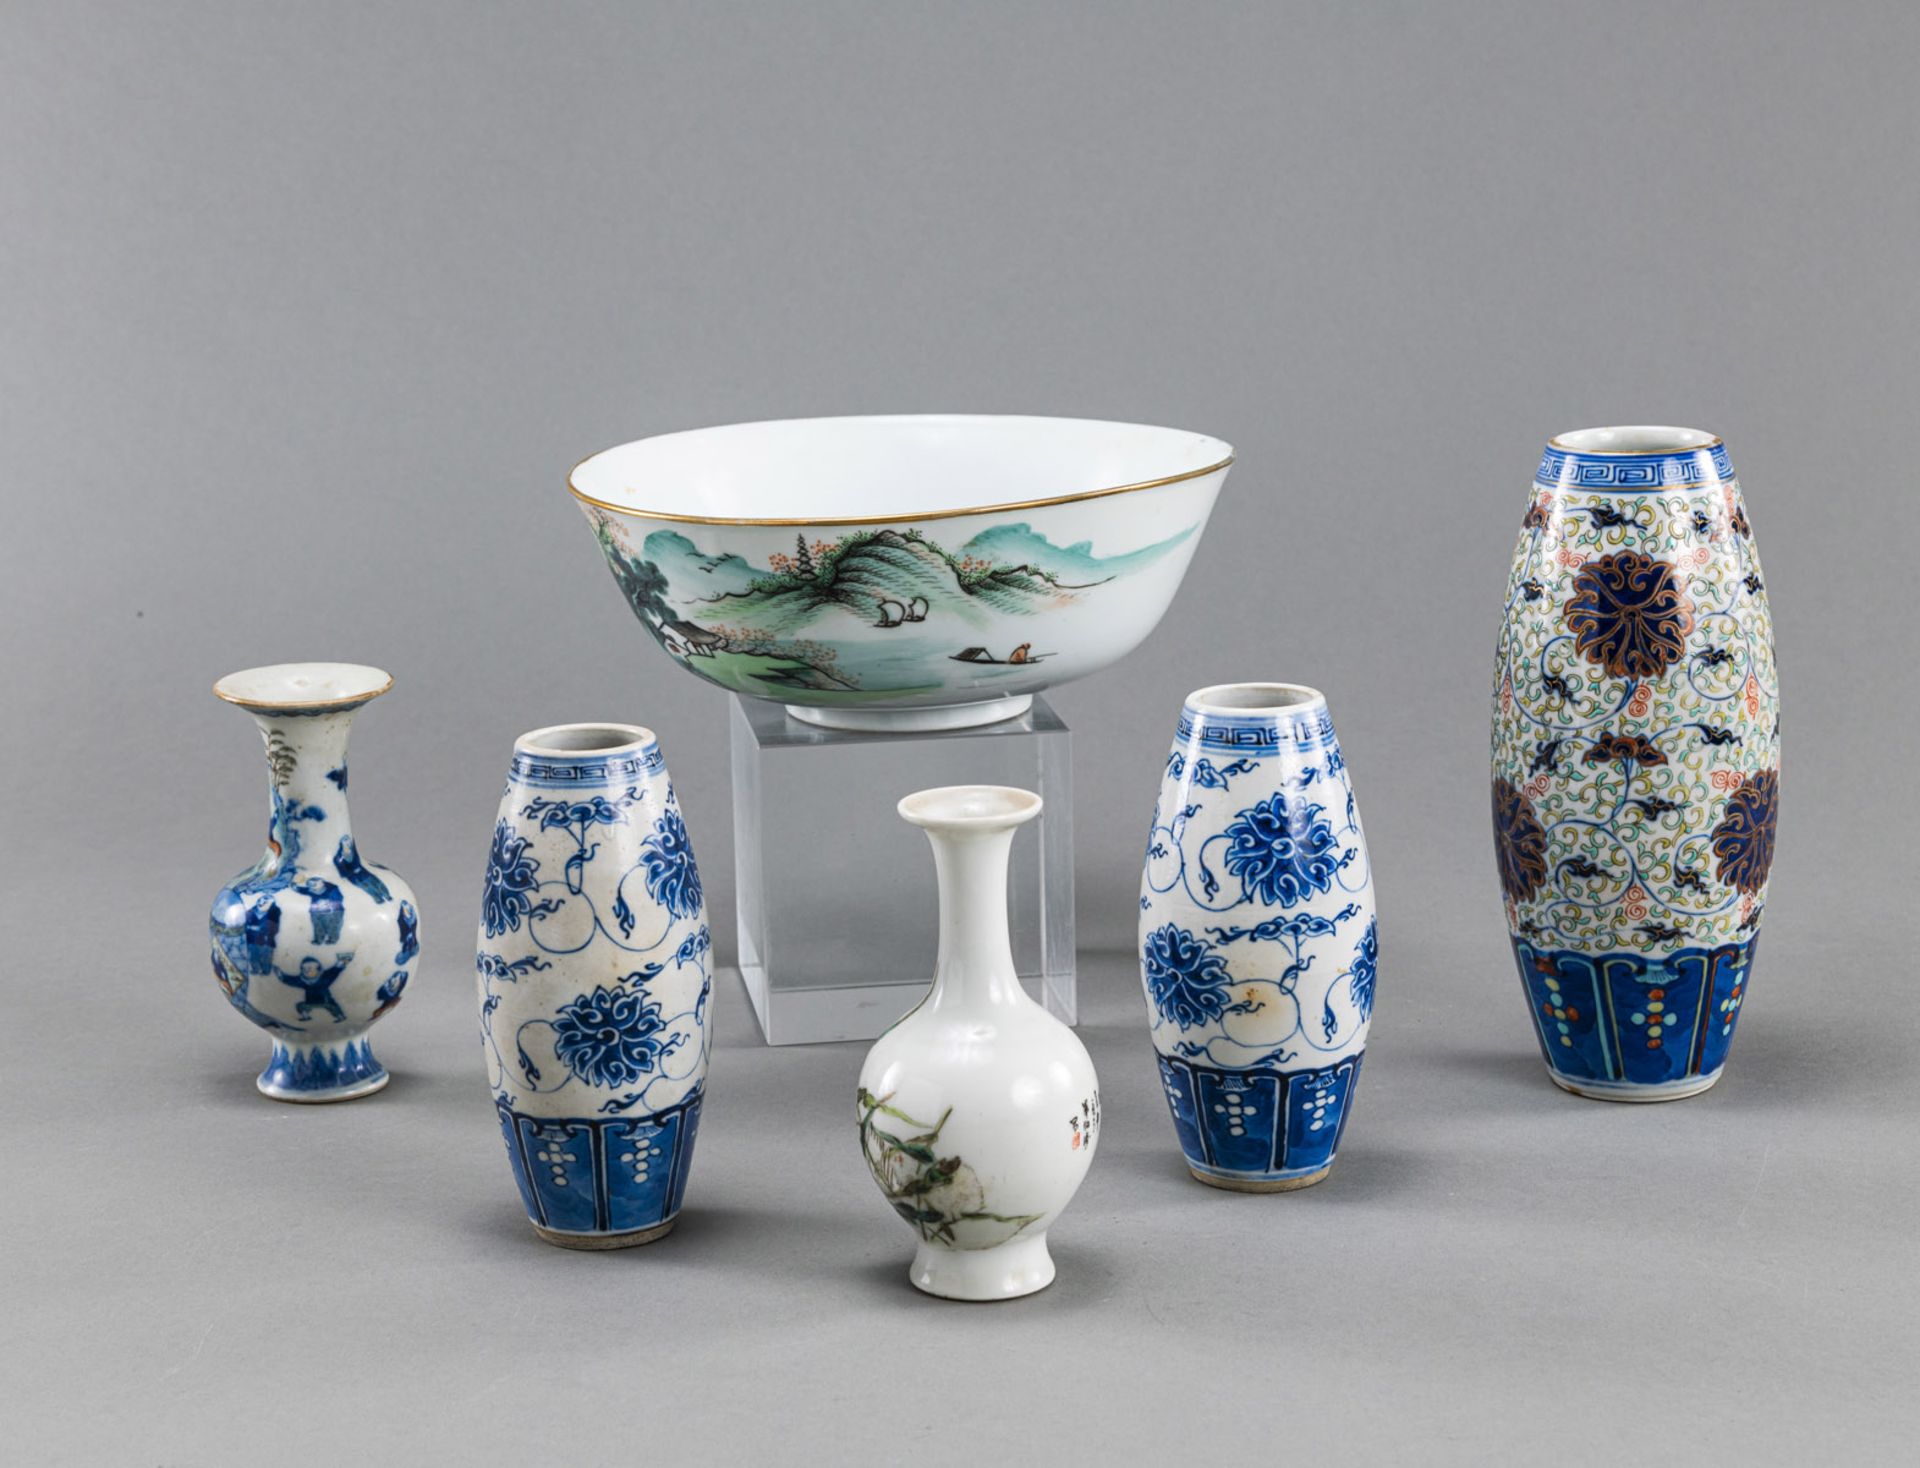 A GROUP OF FIVE PORCELAIN VASES AND A BOWL WITH LOTUS AND LANSCAPE DECOR - Image 2 of 6